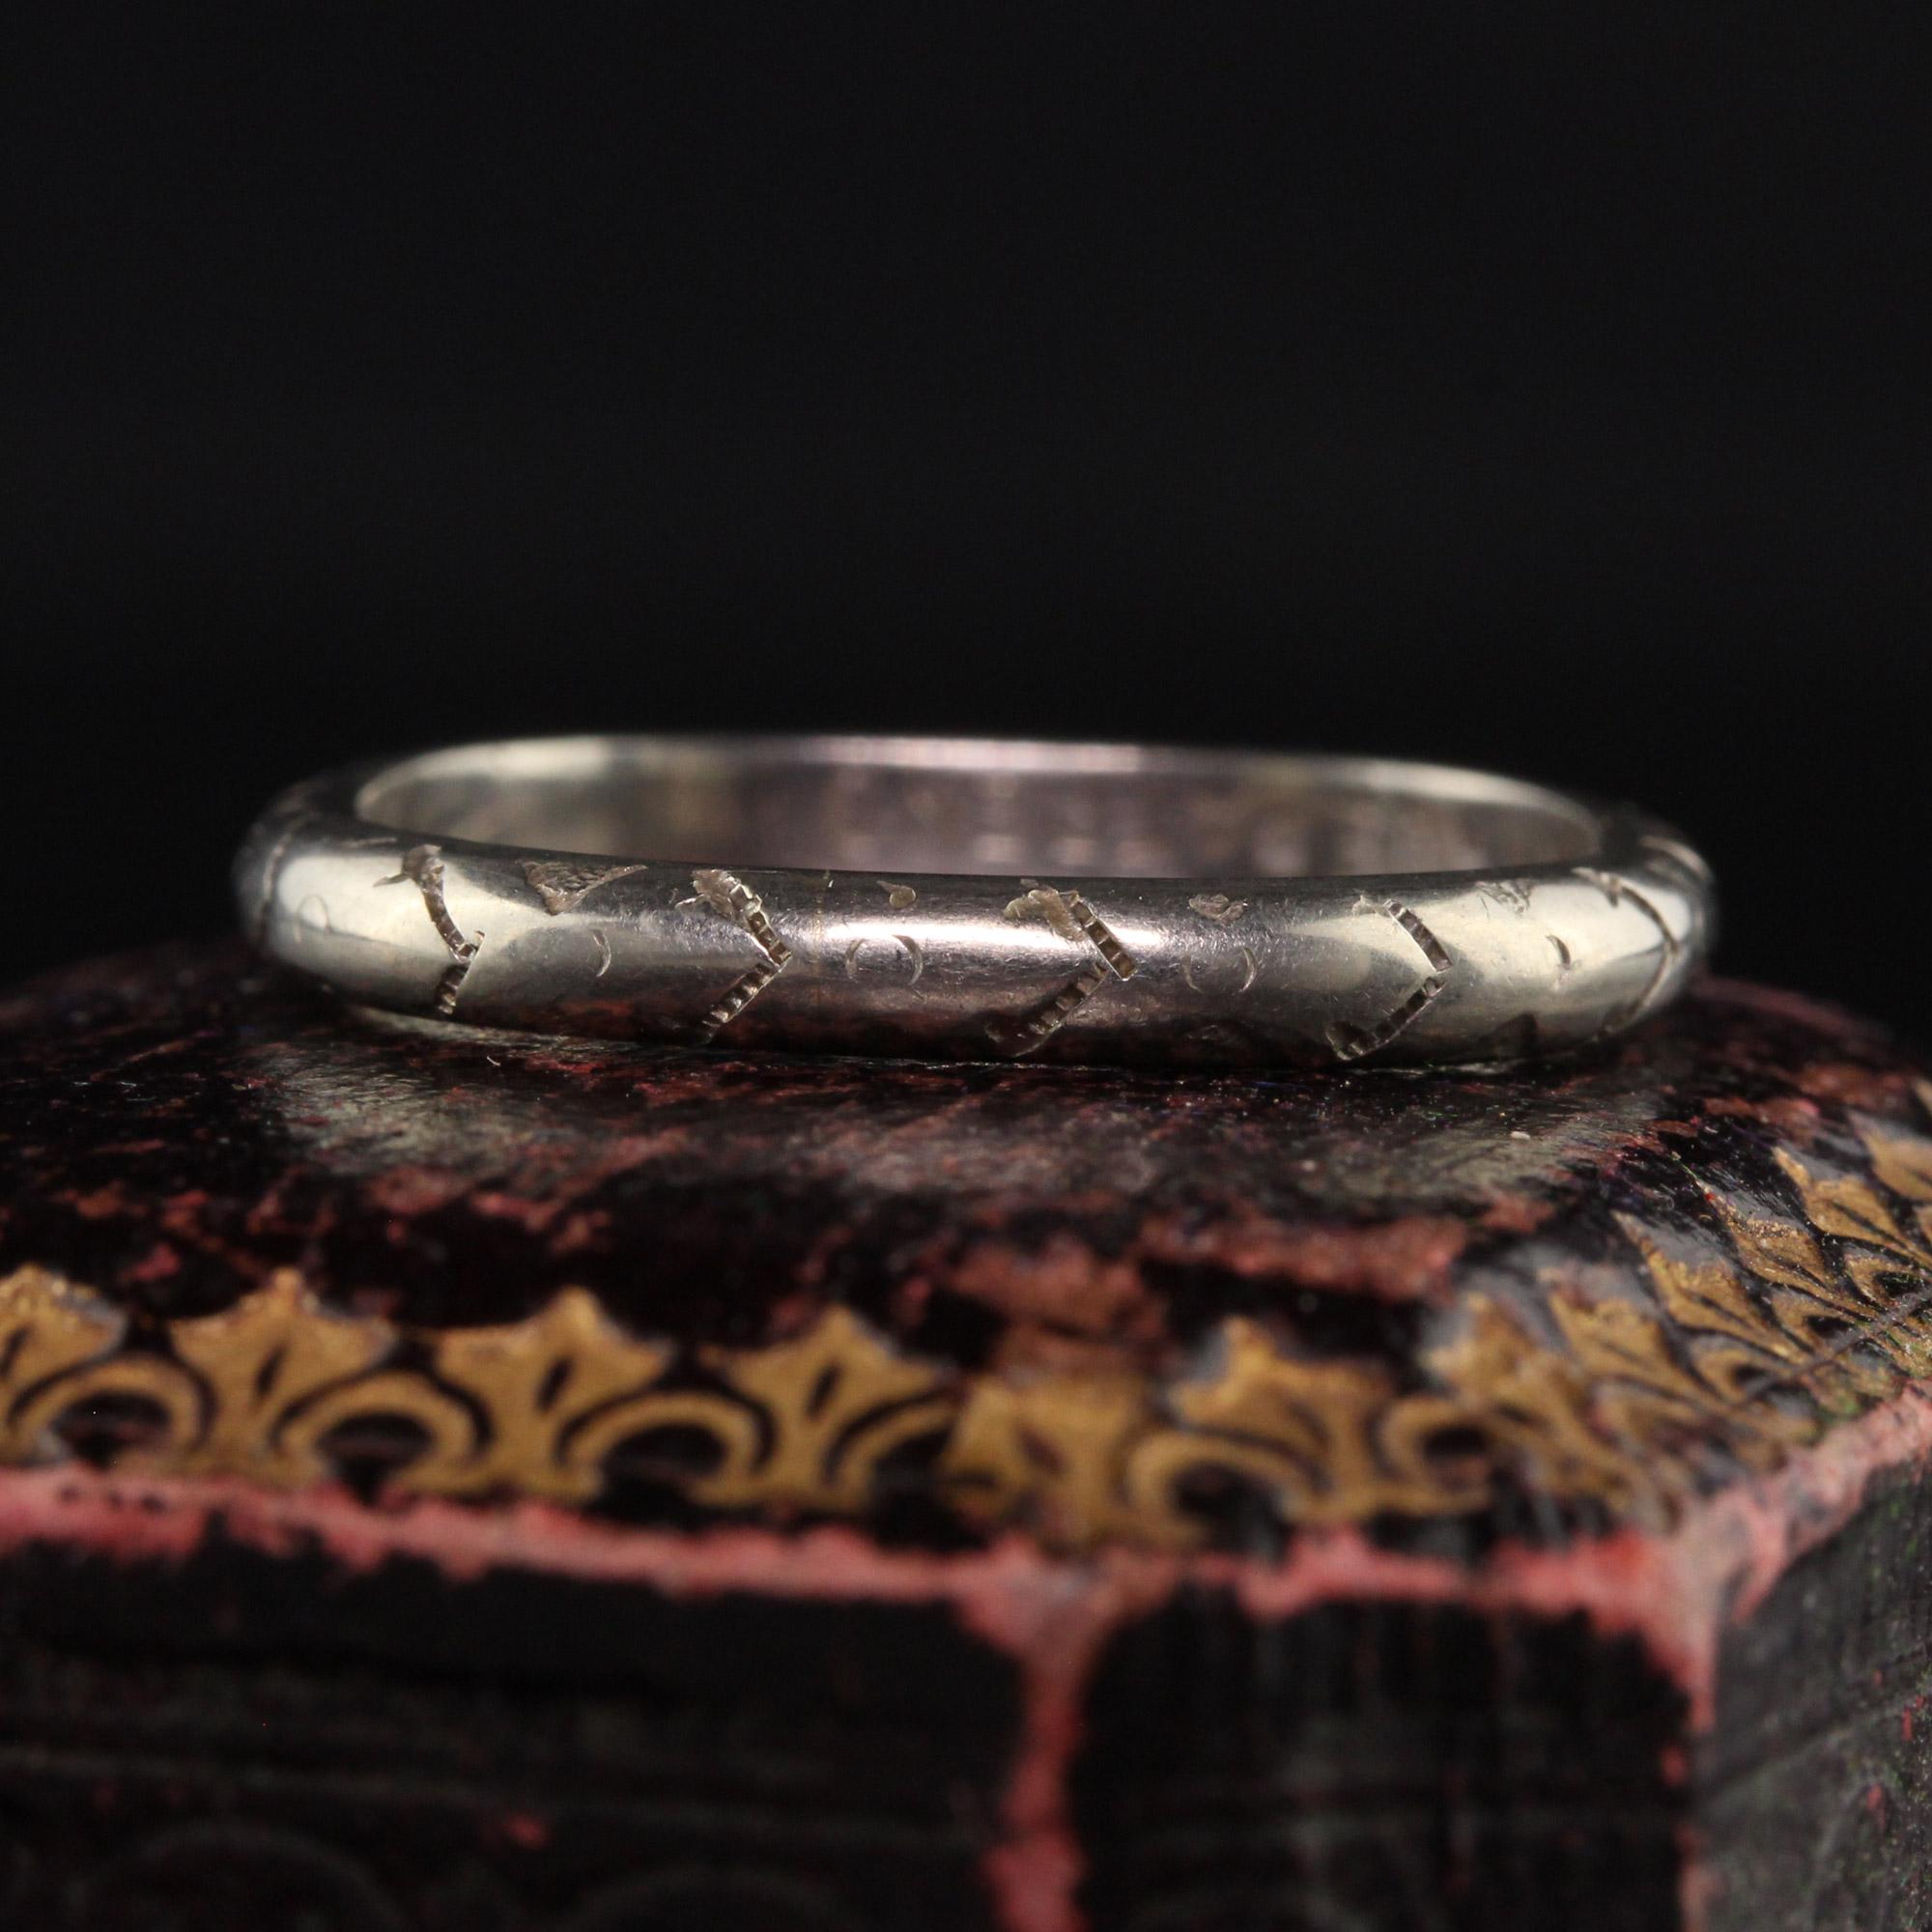 Beautiful Antique Art Deco 18K White Gold Engraved Squared Wedding Band. This gorgeous wedding band is crafted in 18k white gold. The band has an interesting shape that is a rounded square shape. It has engravings going around the entire ring and is